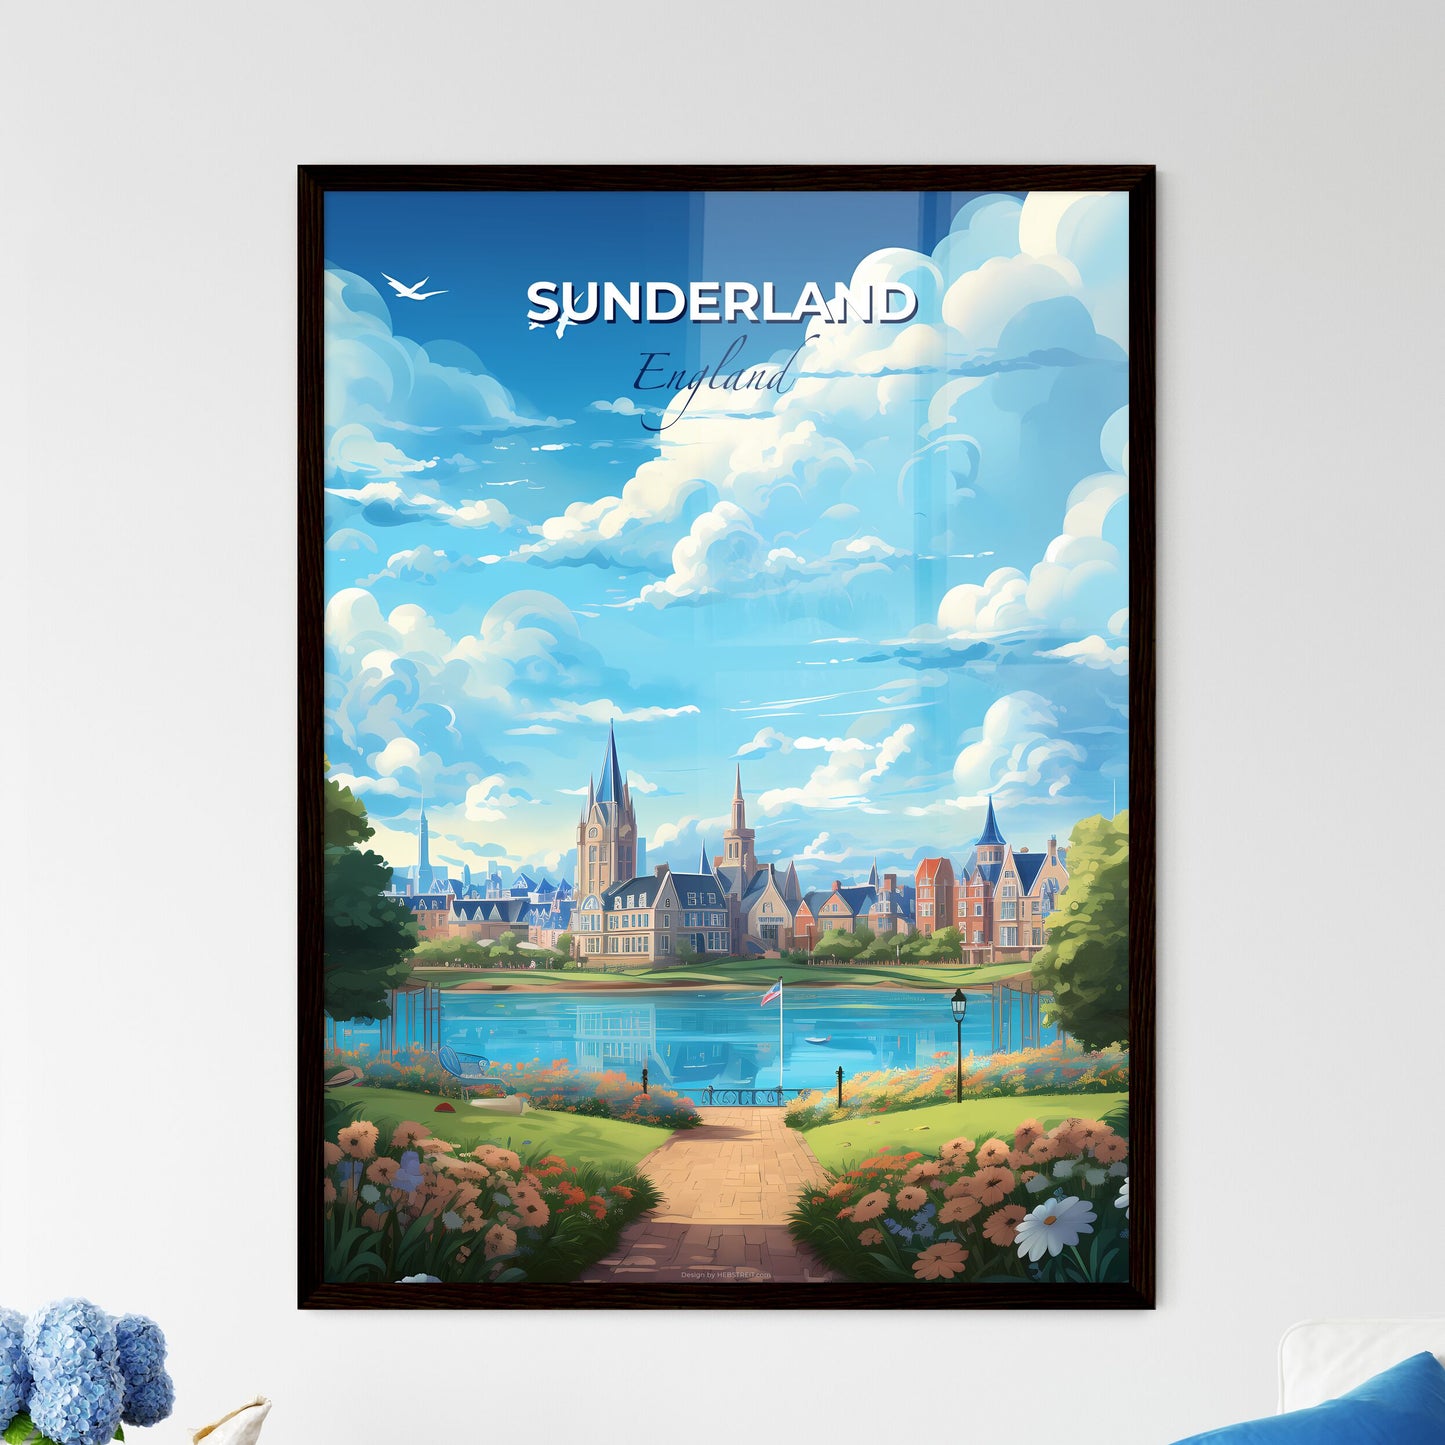 Sunderland England Skyline - A Landscape Of A City With A Lake And Trees - Customizable Travel Gift Default Title